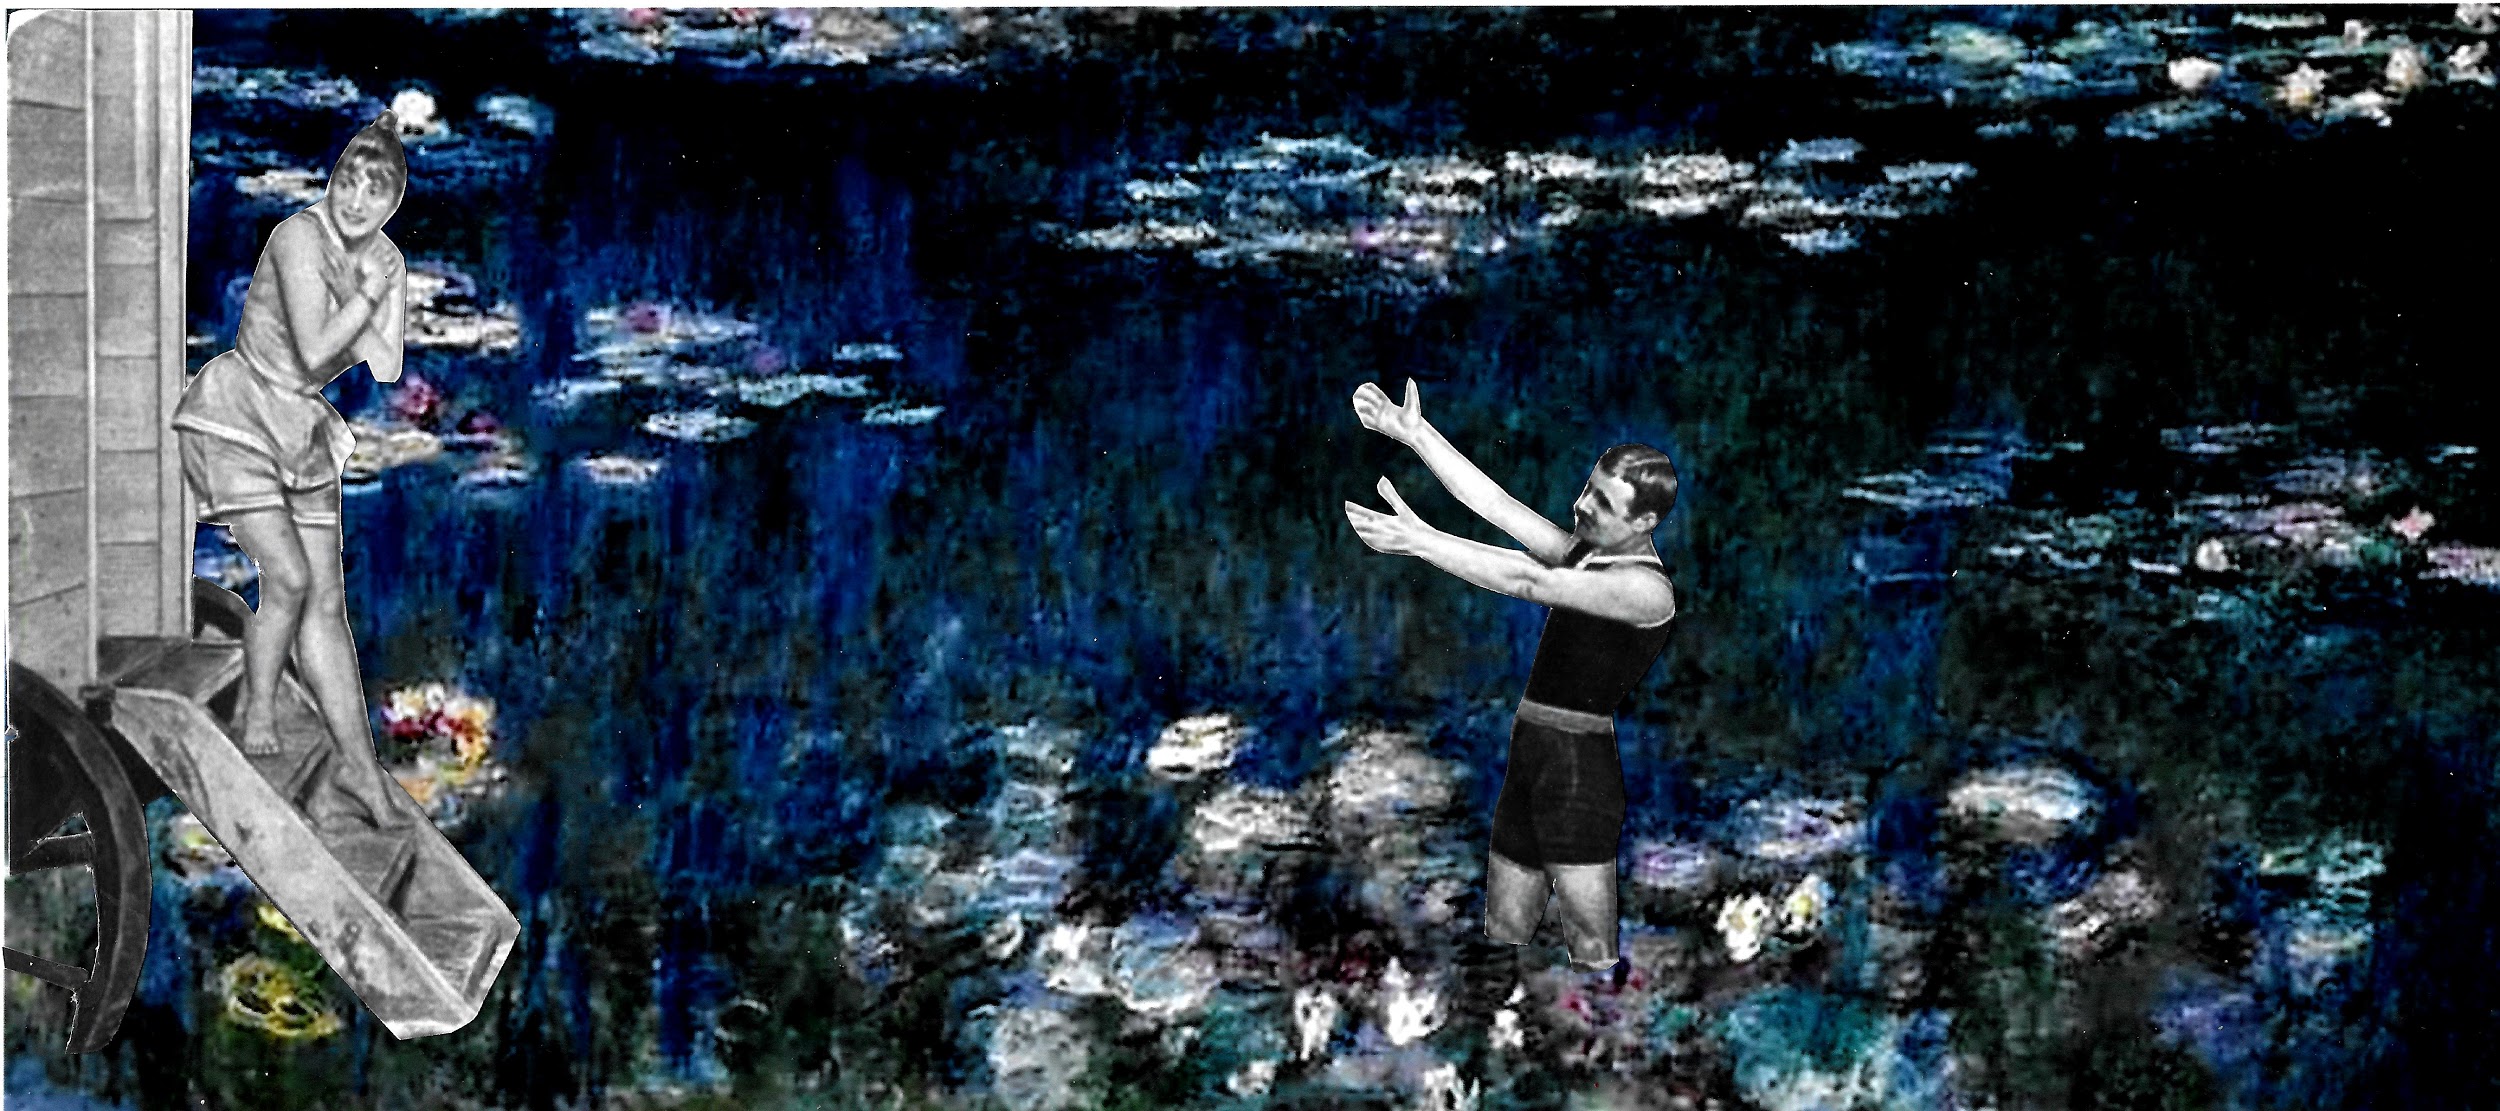 Man standing waste deep in a pond of water lilies coaxes a woman in nineteen century bathing costume off her bather machine.